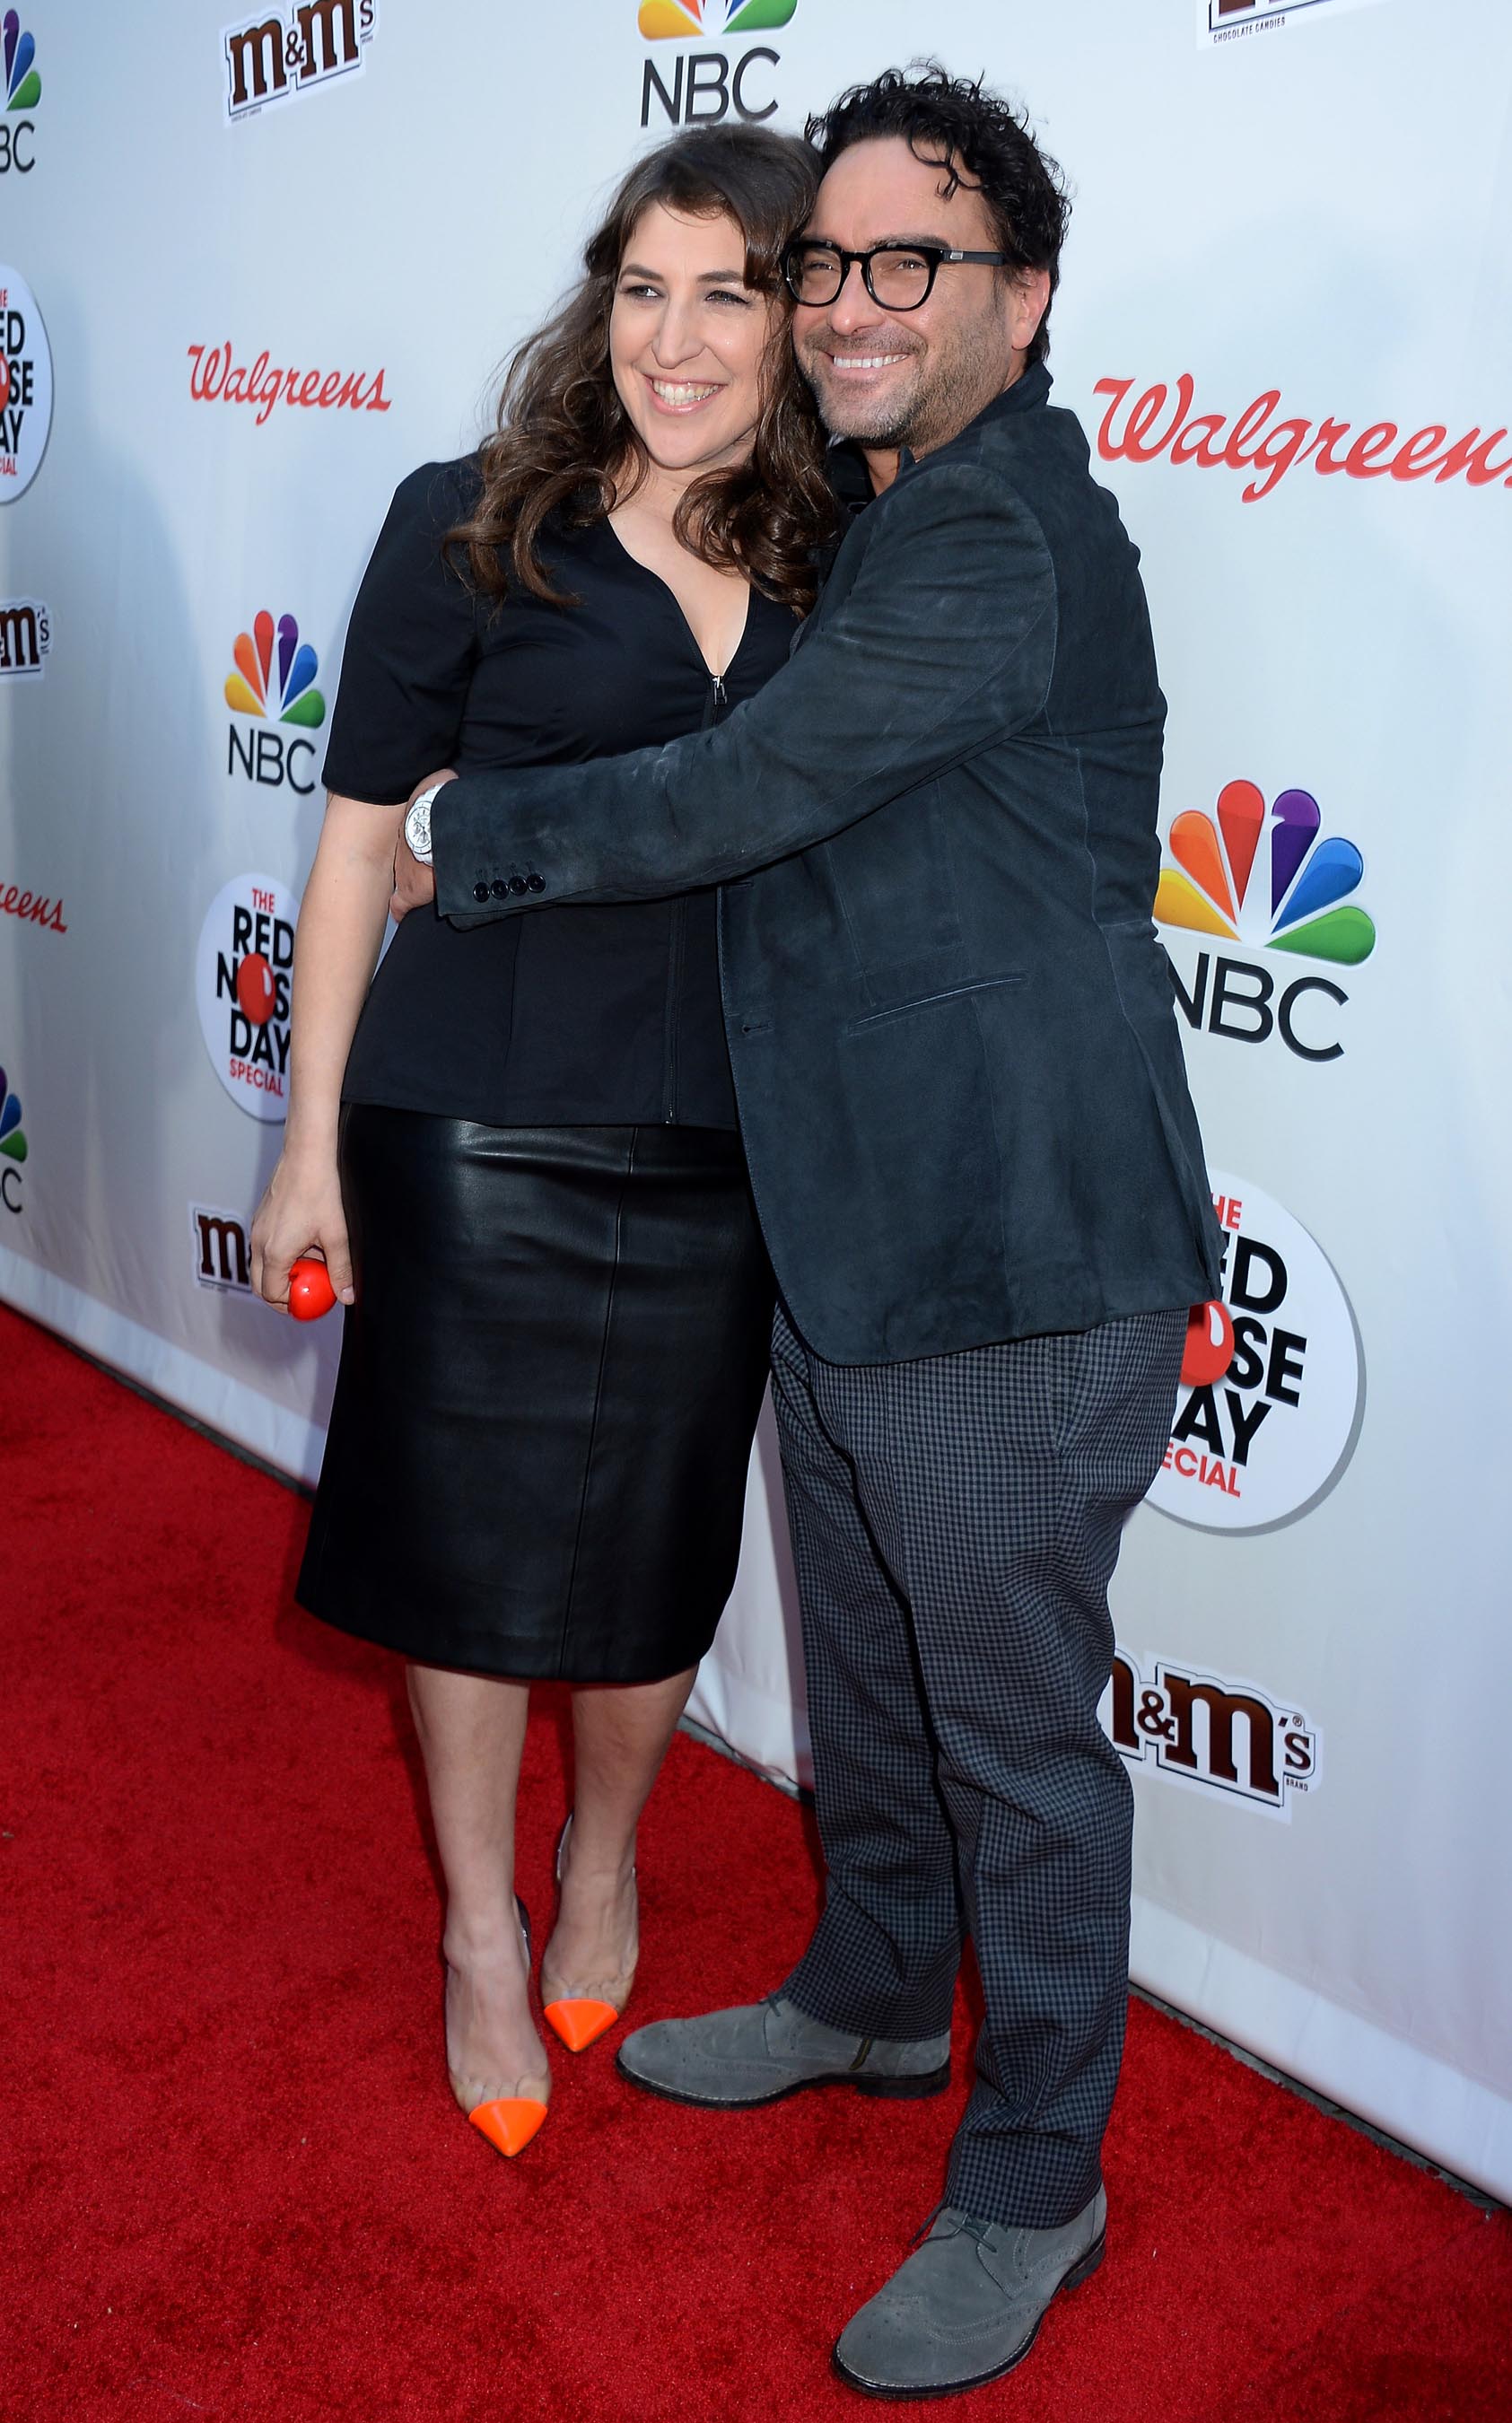 Mayim Bialik attends NBC Red Nose Day Special